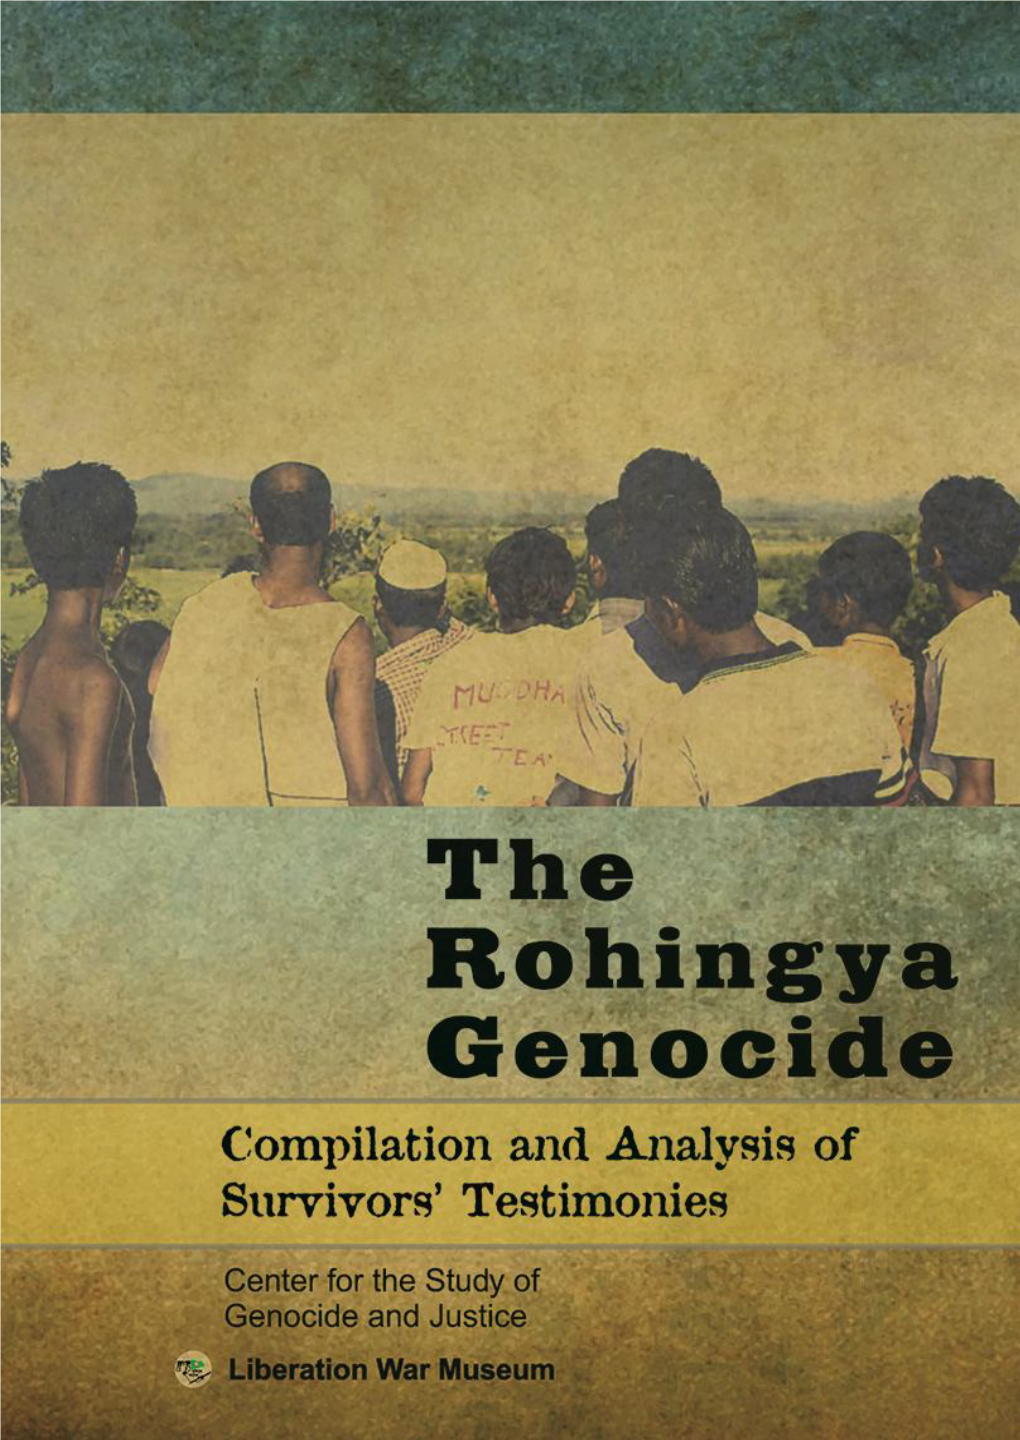 The Rohingya Genocide Compilation and Analysis of Survivors’ Testimonies Collected by the CSGJ Research Team